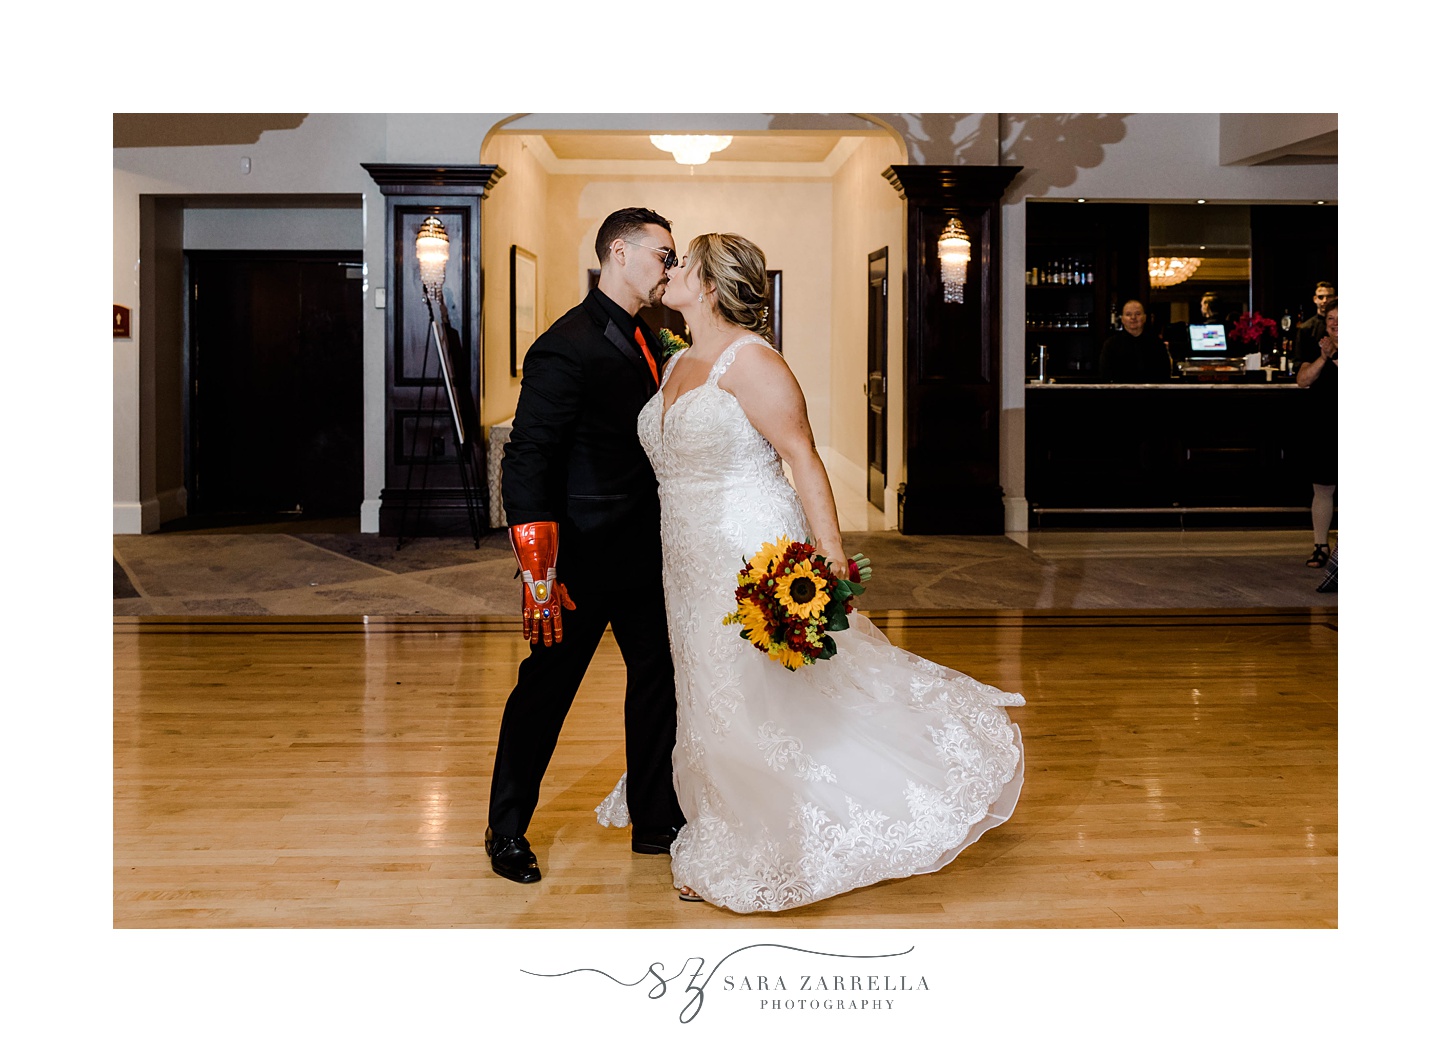 newlyweds kiss on dance floor while bride holds bouquet of sunflowers and groom wears Iron Man prop arm